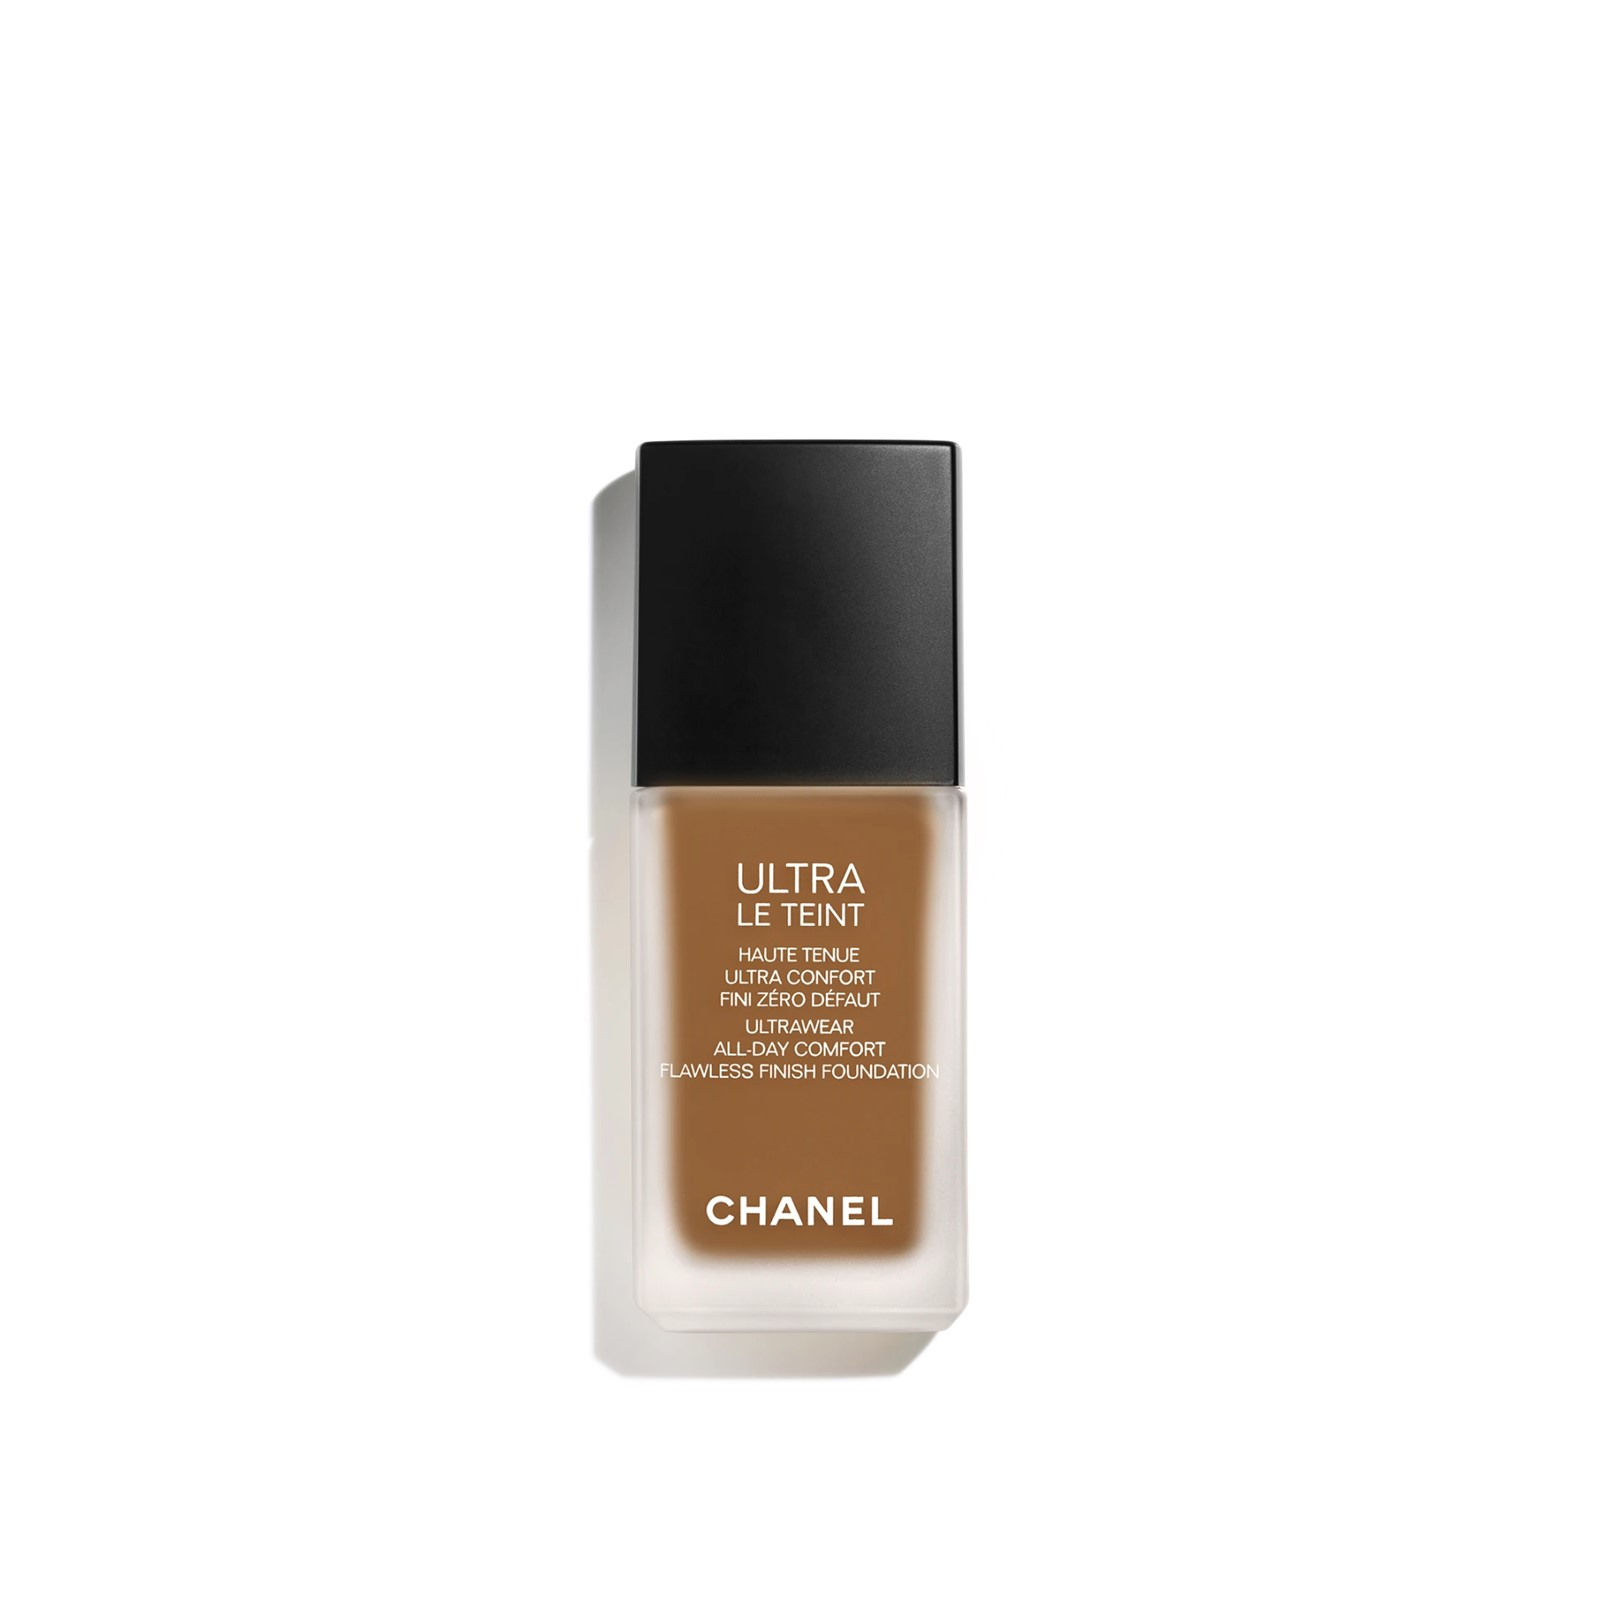 CHANEL Ultra Le Teint All Day Comfort - B140 - 30ml